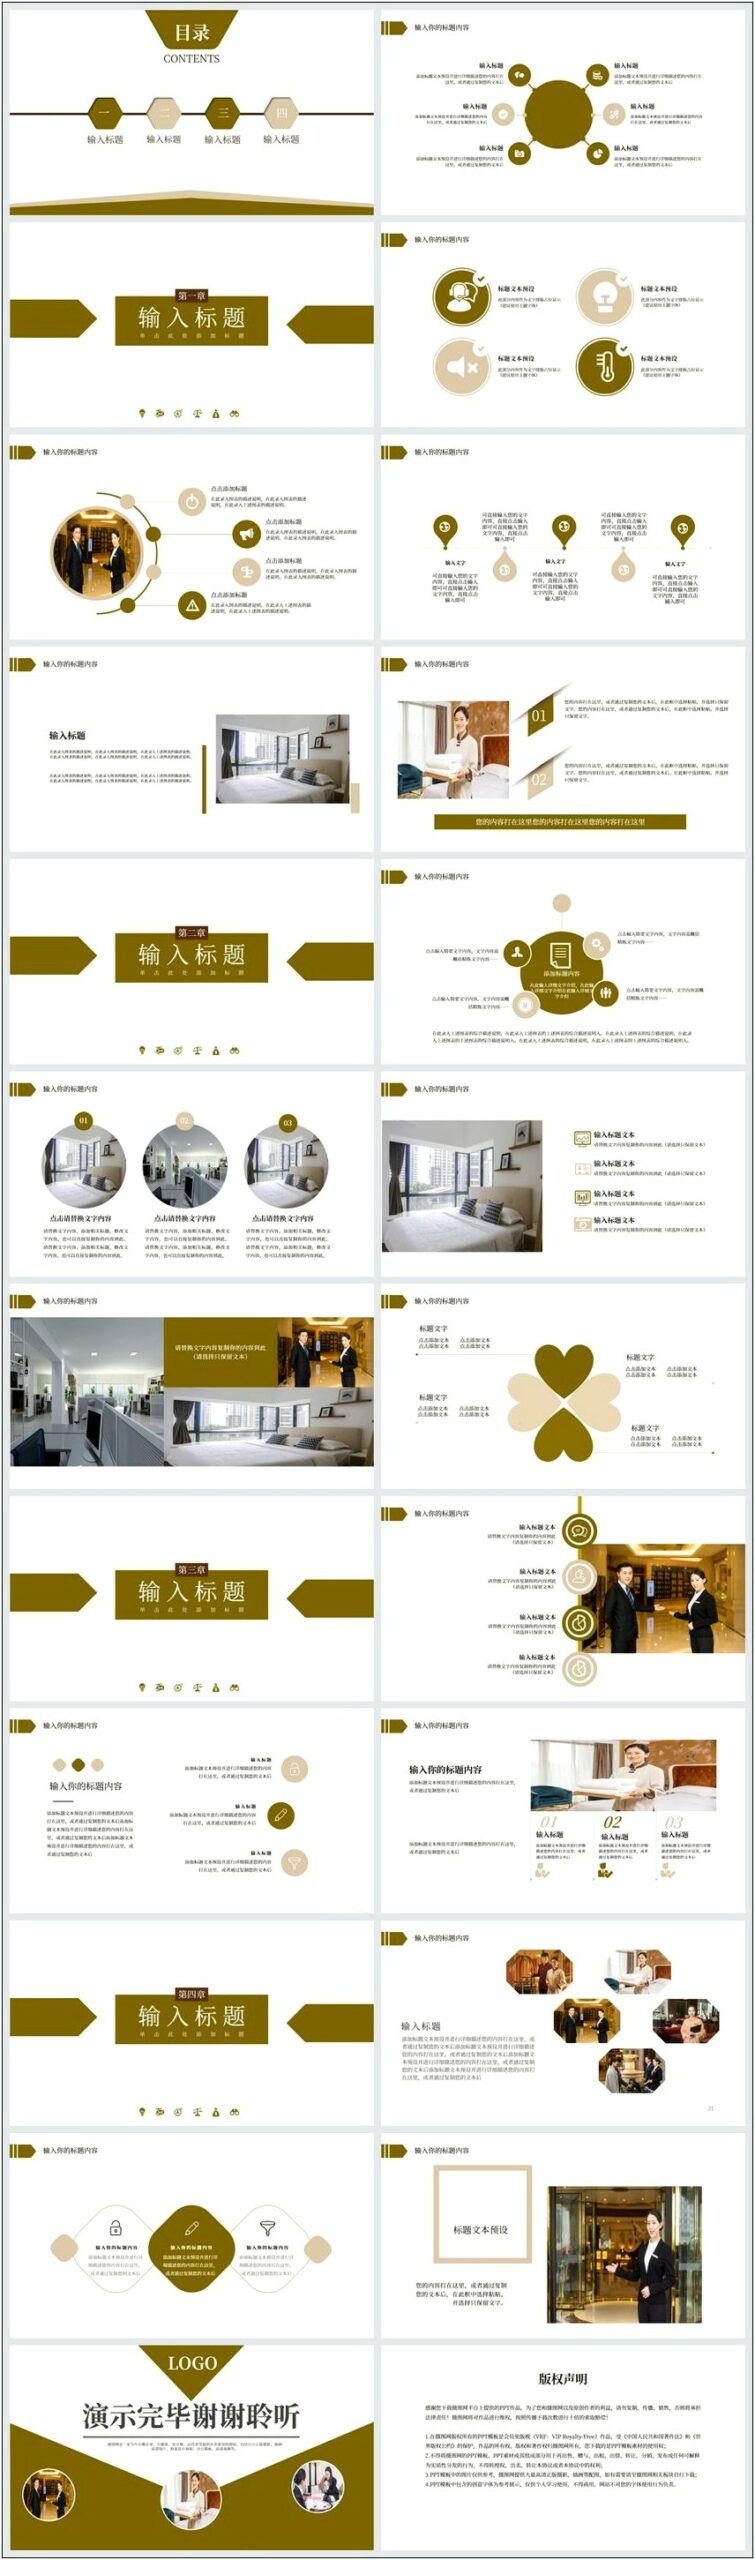 Hotel Management Ppt Templates Free Download